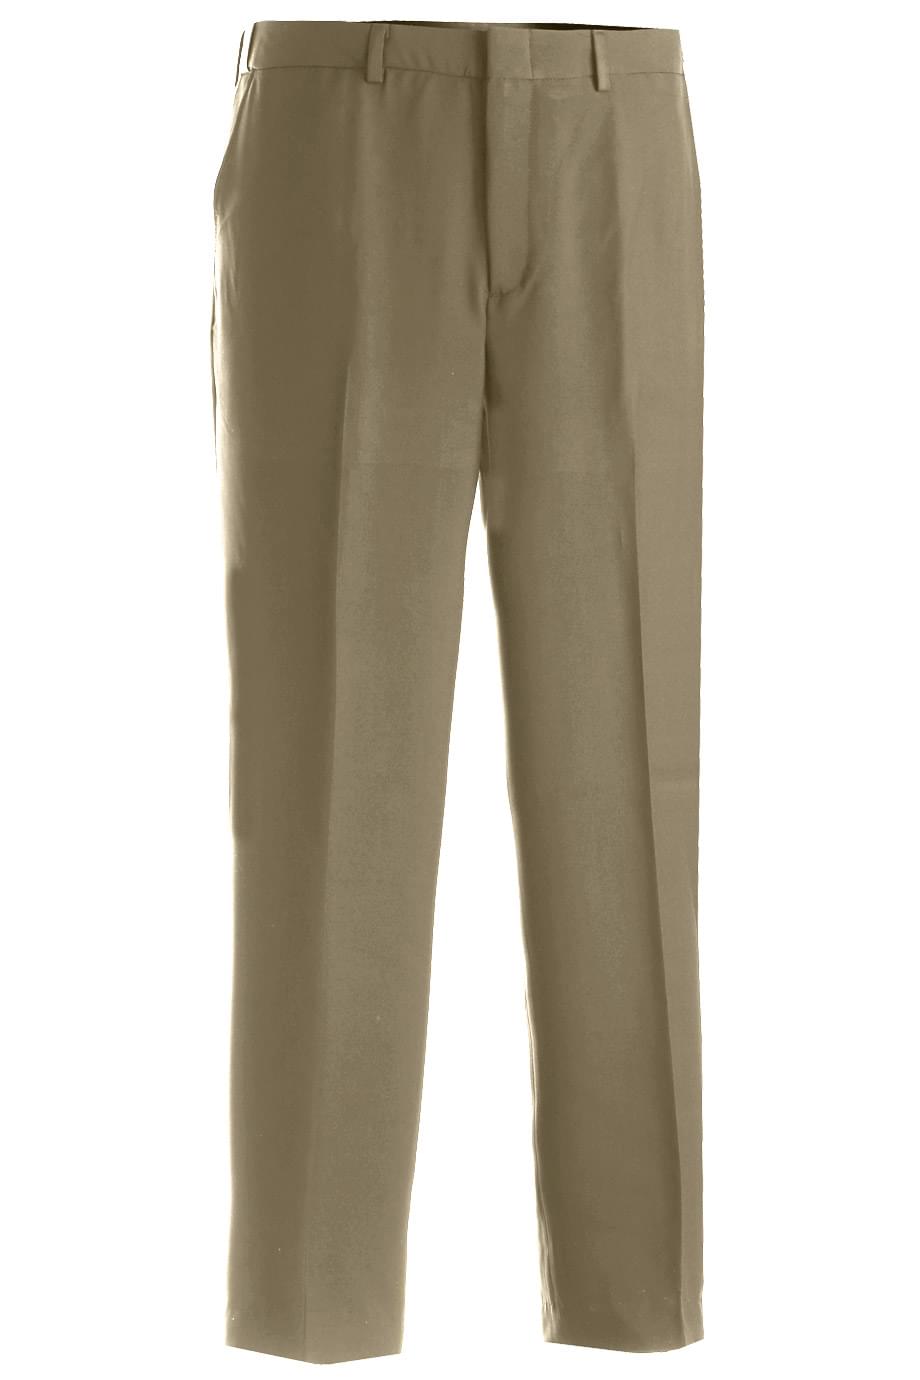 Edwards 2588  MENS INTAGLIO FLAT FRONT EASY FIT PANT